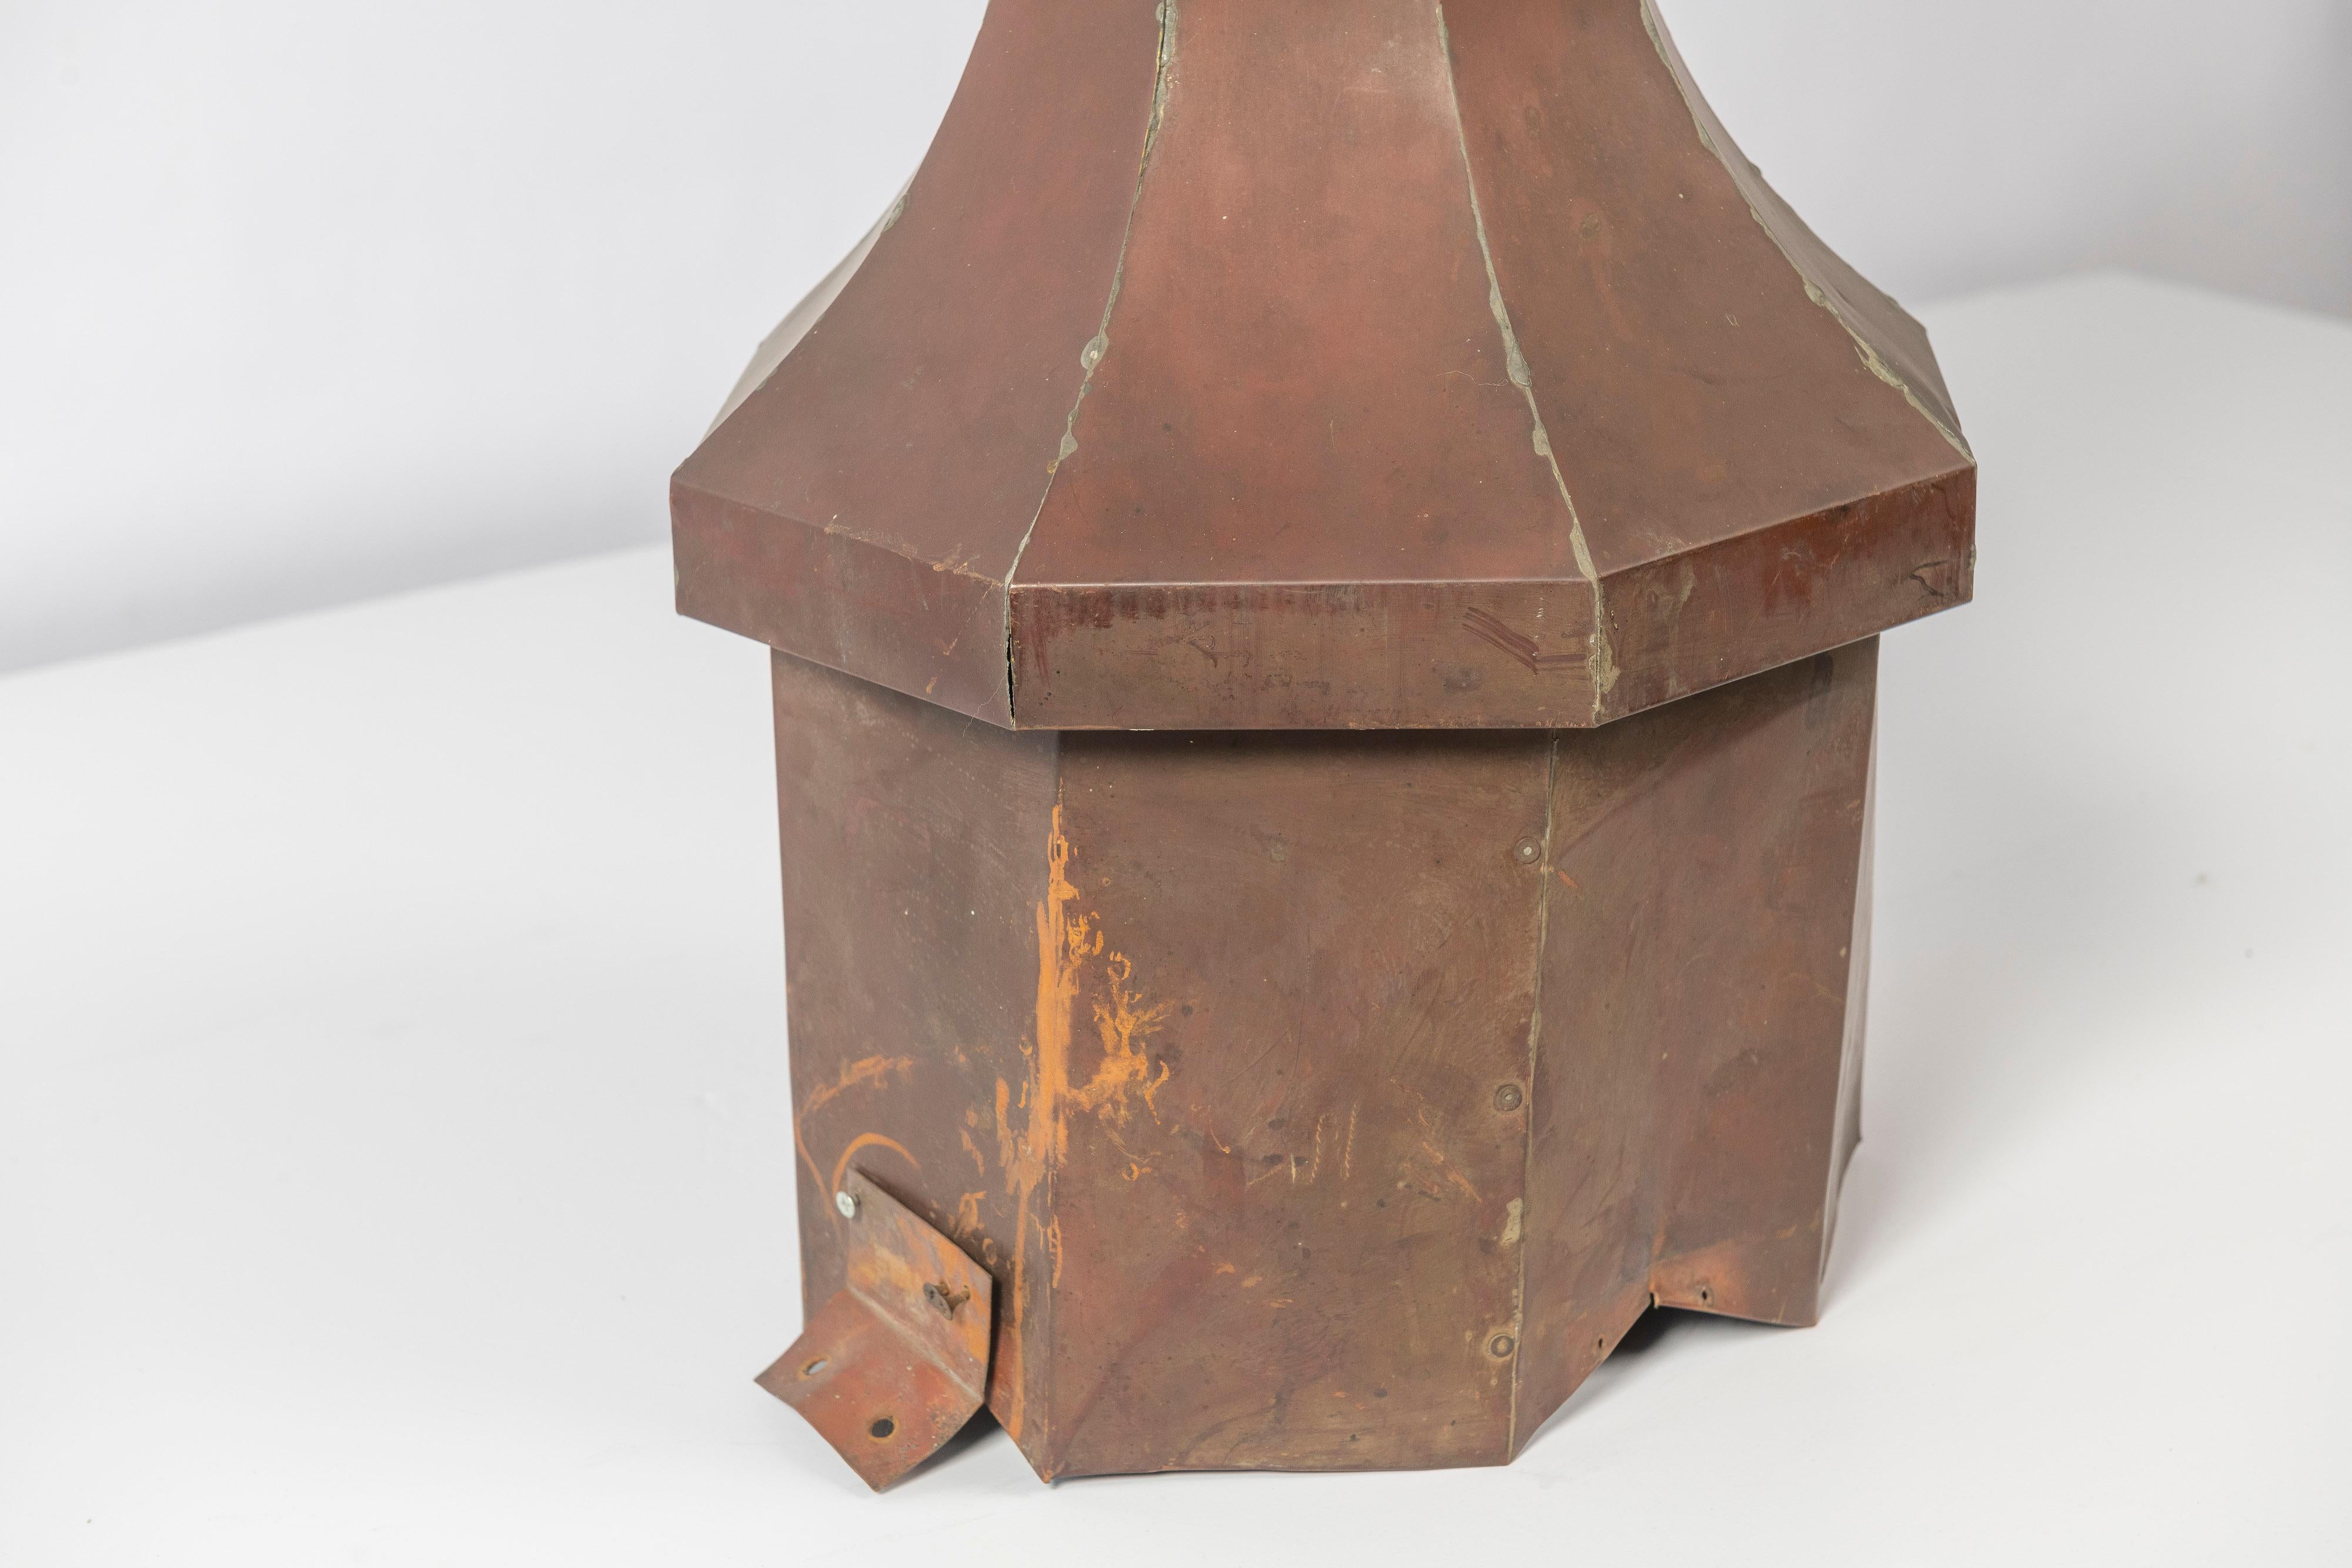 American Classical Antique Architectural Copper Spire with Hexagonal Base